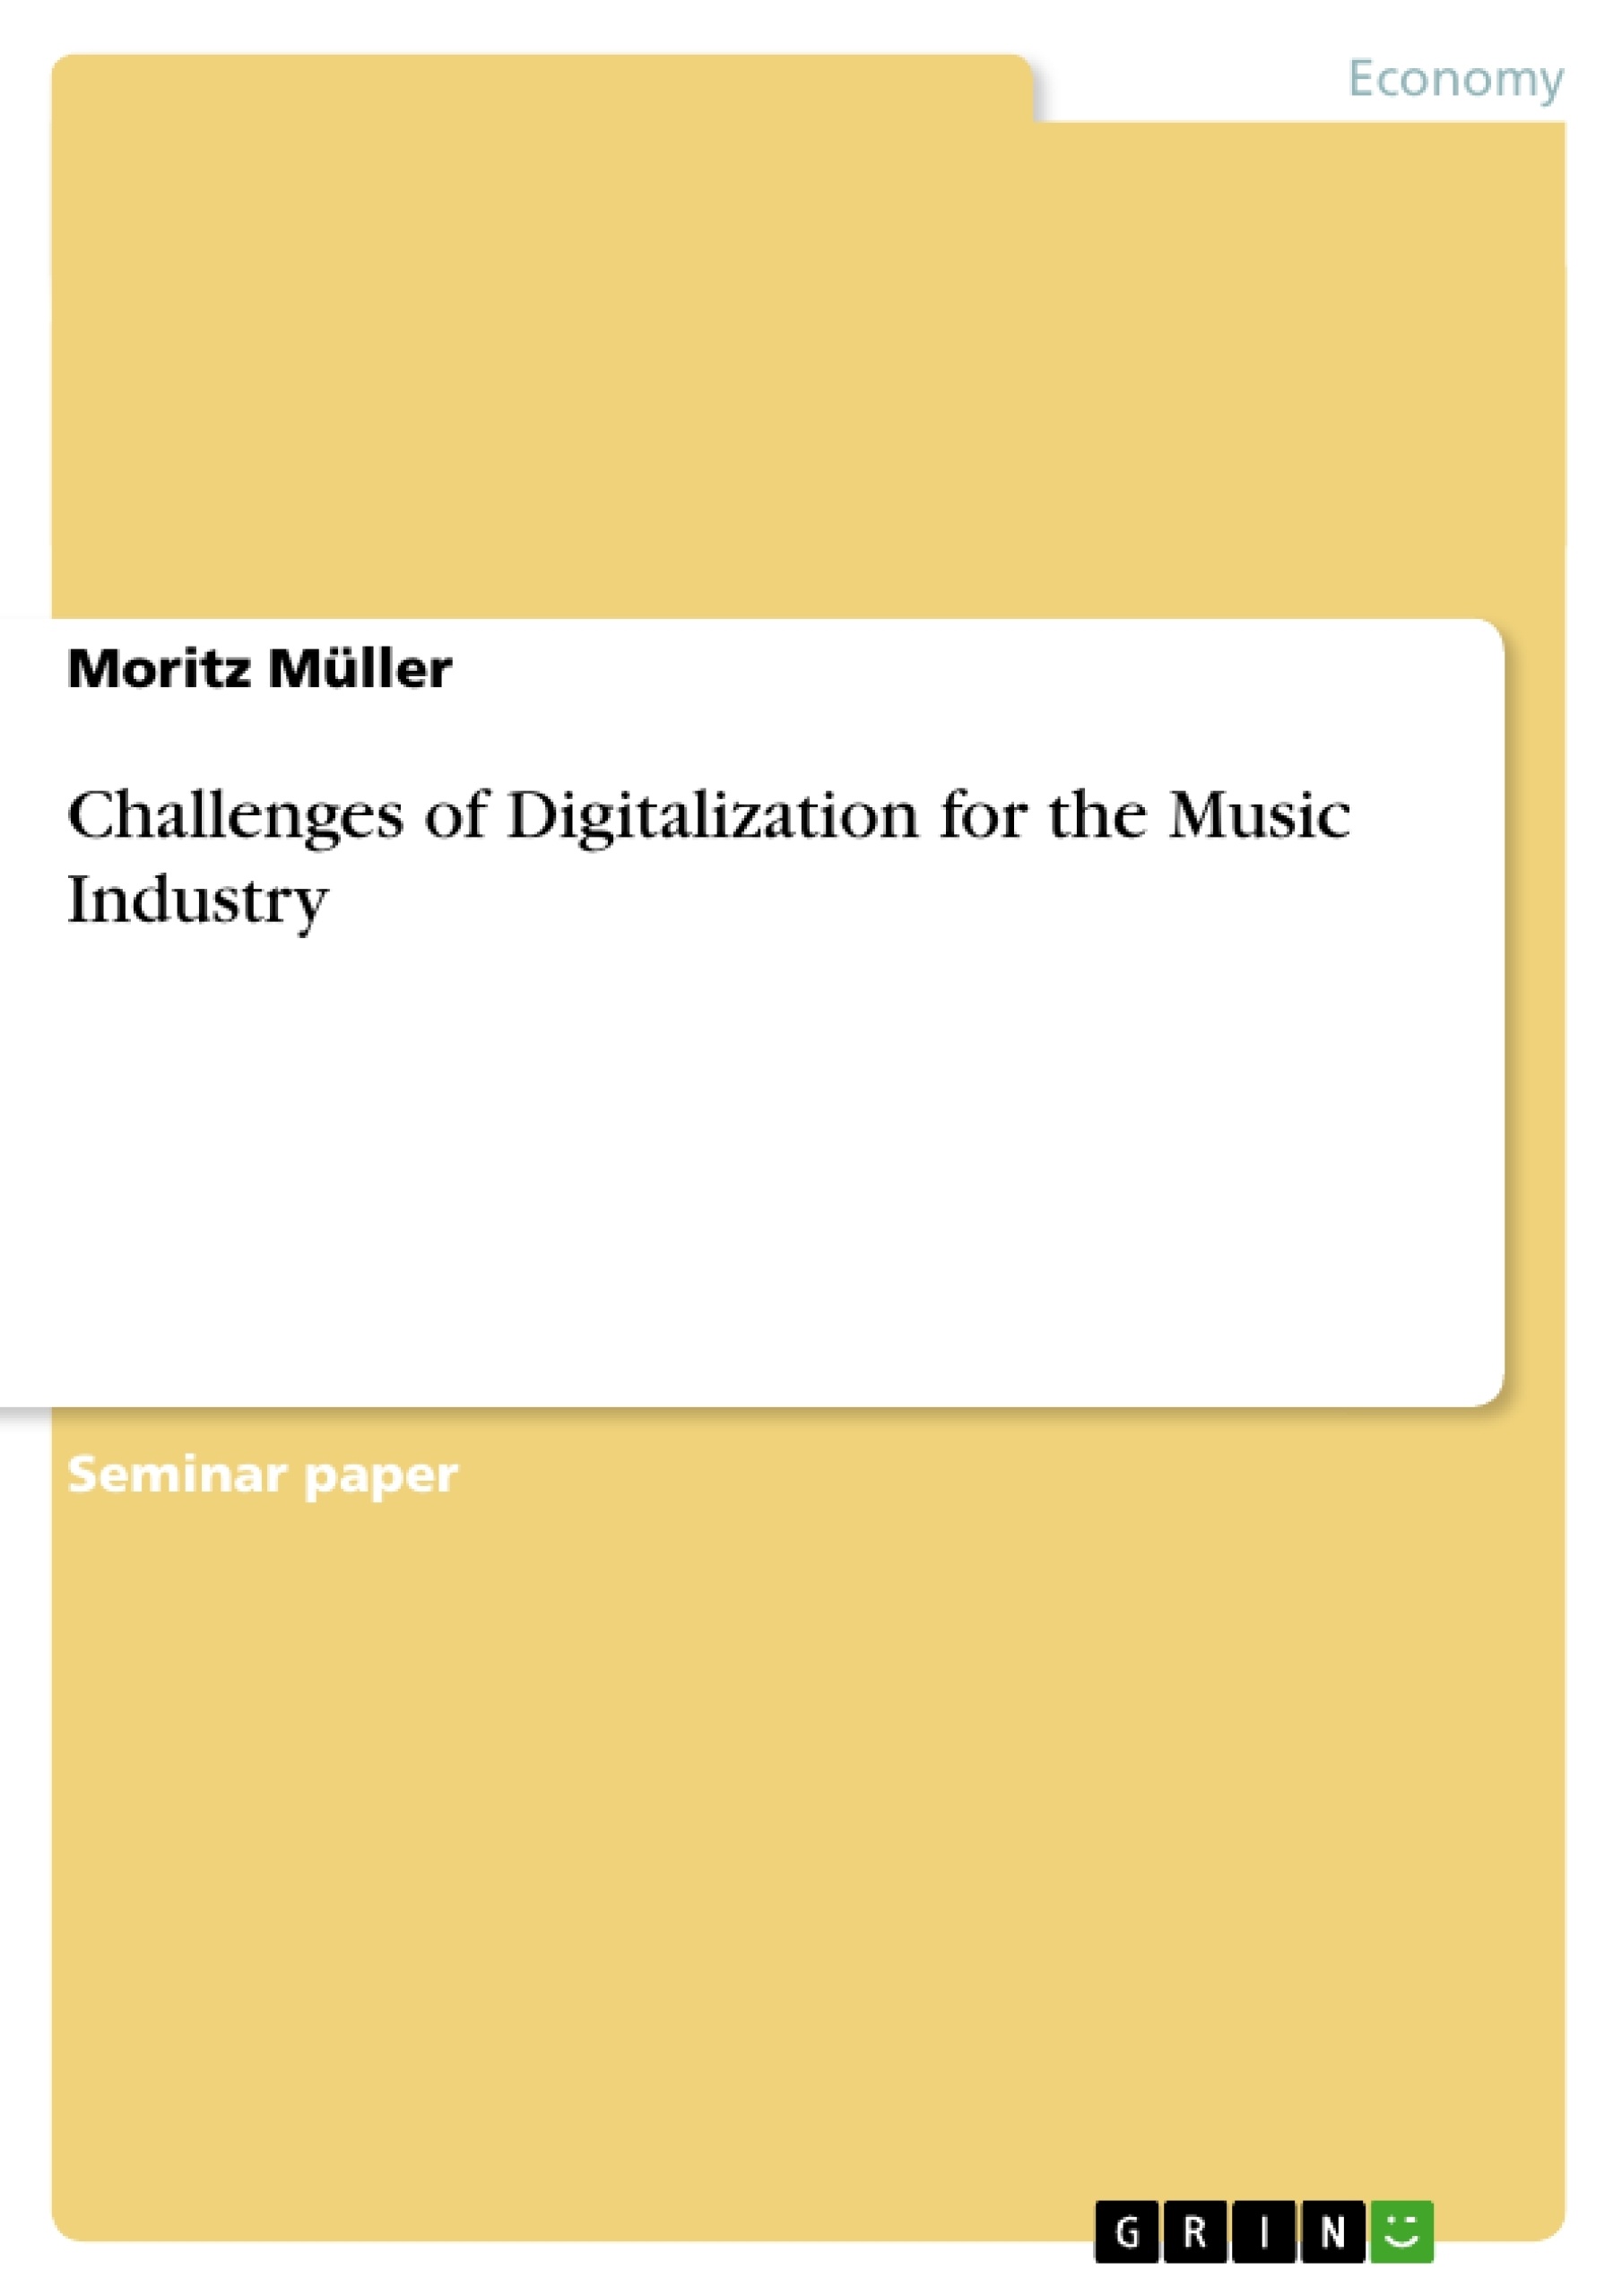 Title: Challenges of Digitalization for the Music Industry